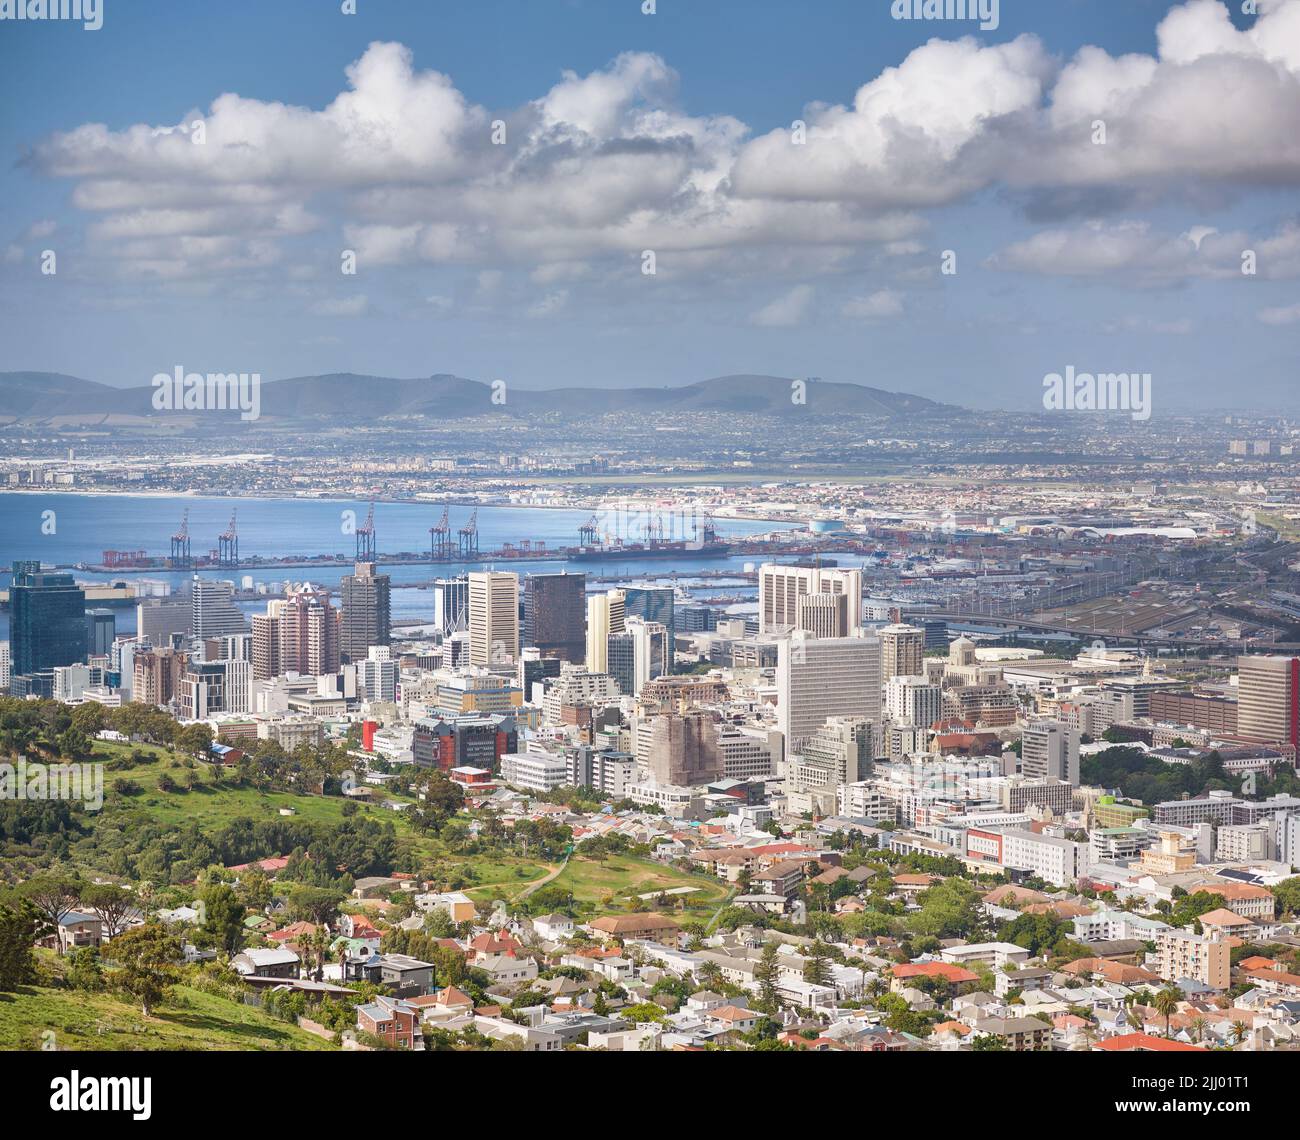 Landscape of buildings in an urban town with greenery along the mountain and sea. Copy space with views from Signal Hill in Cape Town, South Africa of Stock Photo